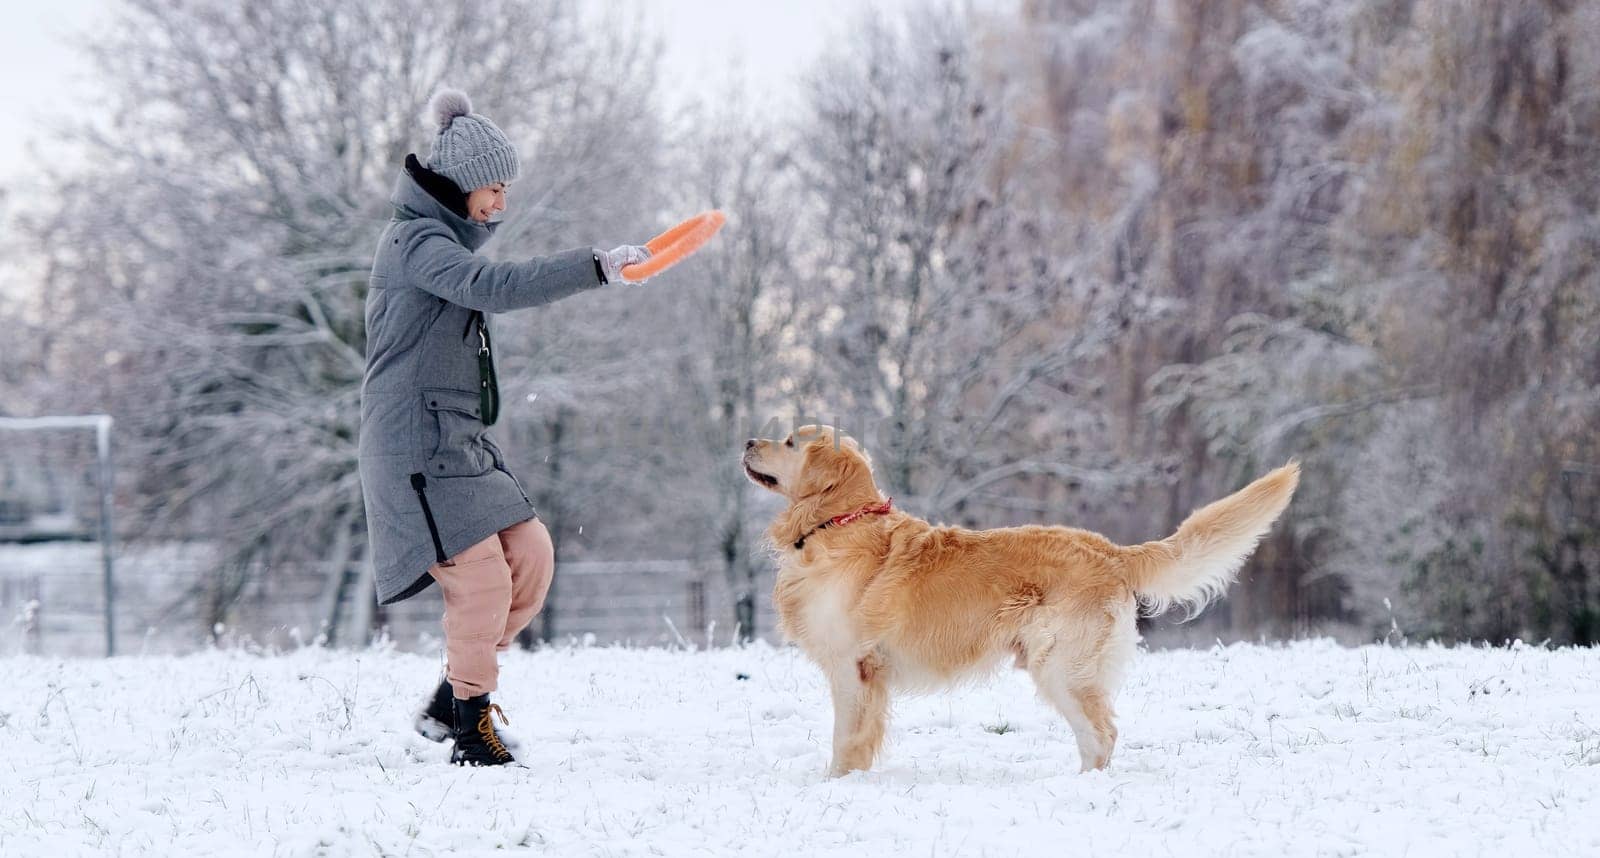 Girl Throwing Ring Toy To Adorable Golden Retriever Dog On A Snow Field by GekaSkr